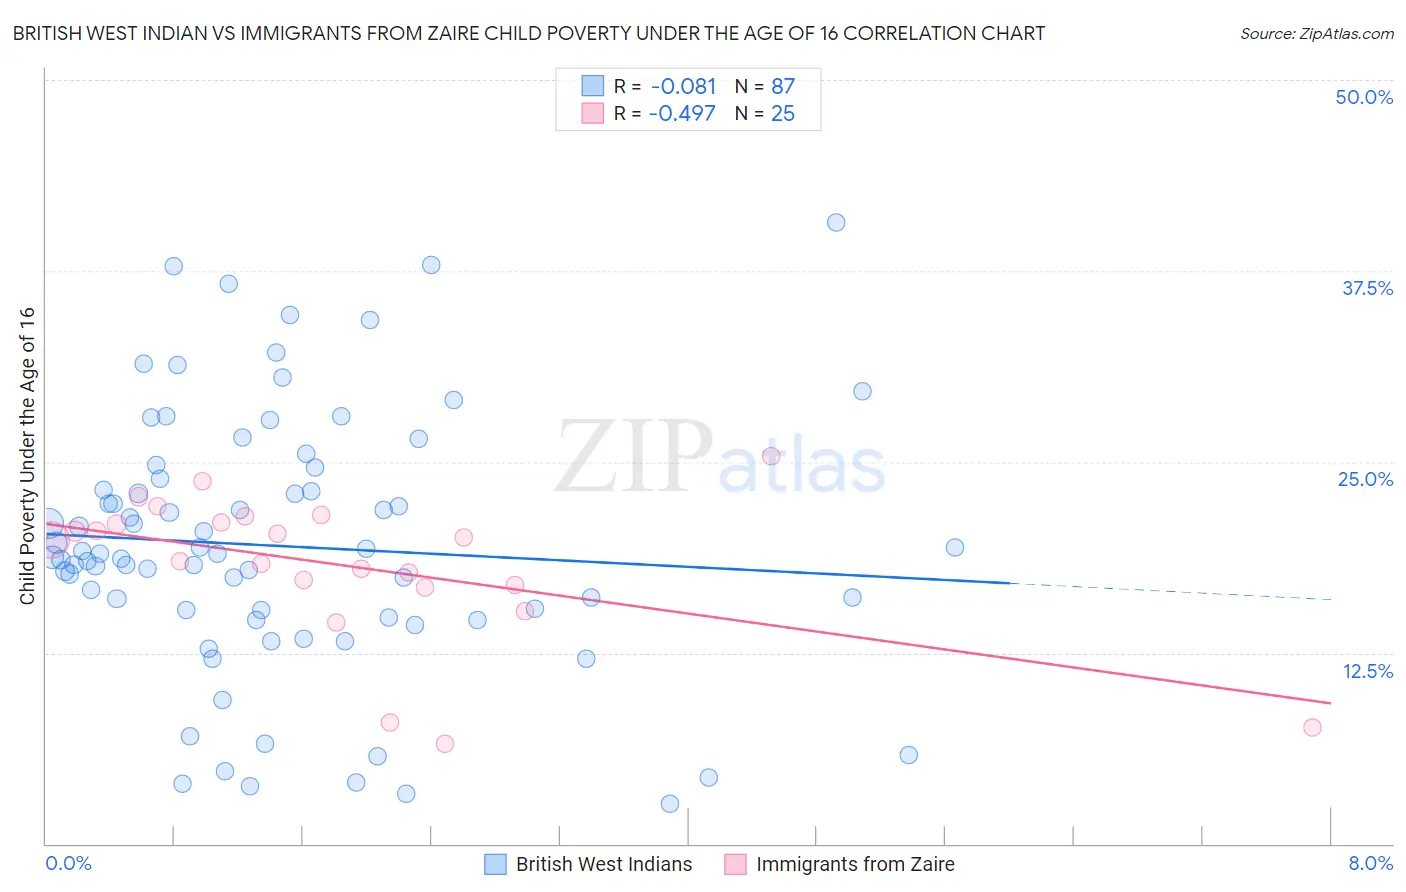 British West Indian vs Immigrants from Zaire Child Poverty Under the Age of 16